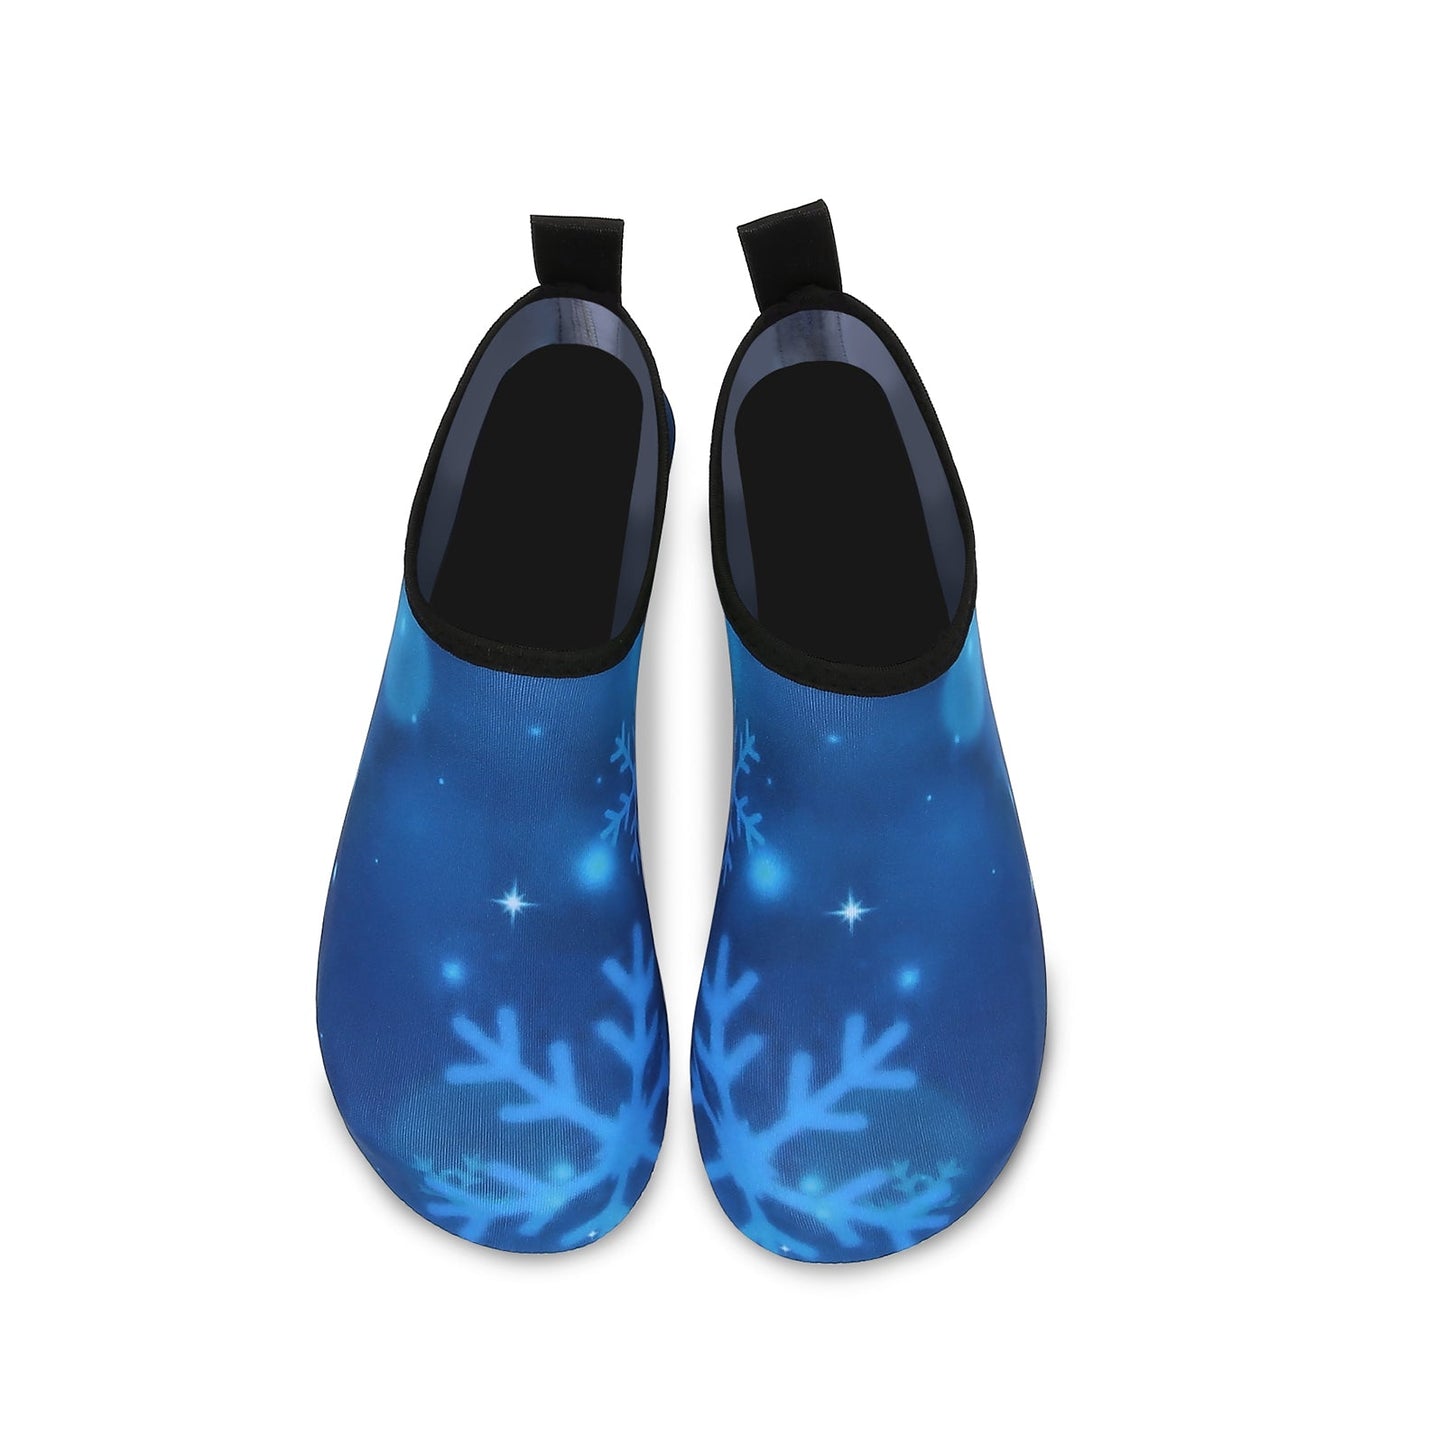 Men and Women a Slip On Barefoot Quick-Dry Beach Aqua Yoga Water Shoes (Snowflake/Blue)